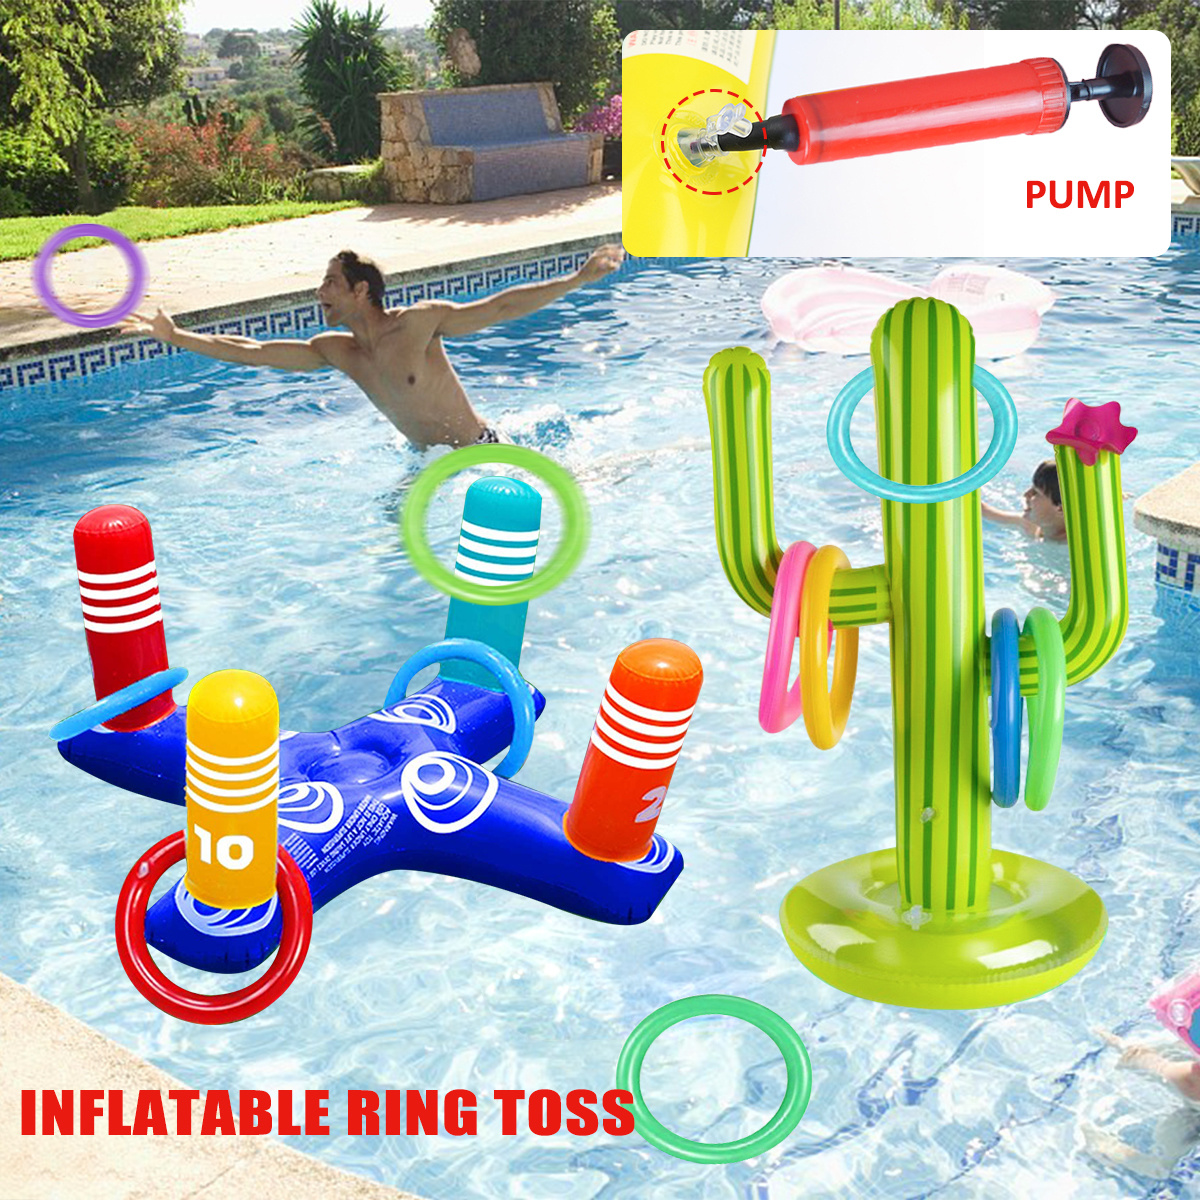 2PCS Inflatable Pool Ring Toss Game Floating Swimming Pool Cactus Ring Toys Set